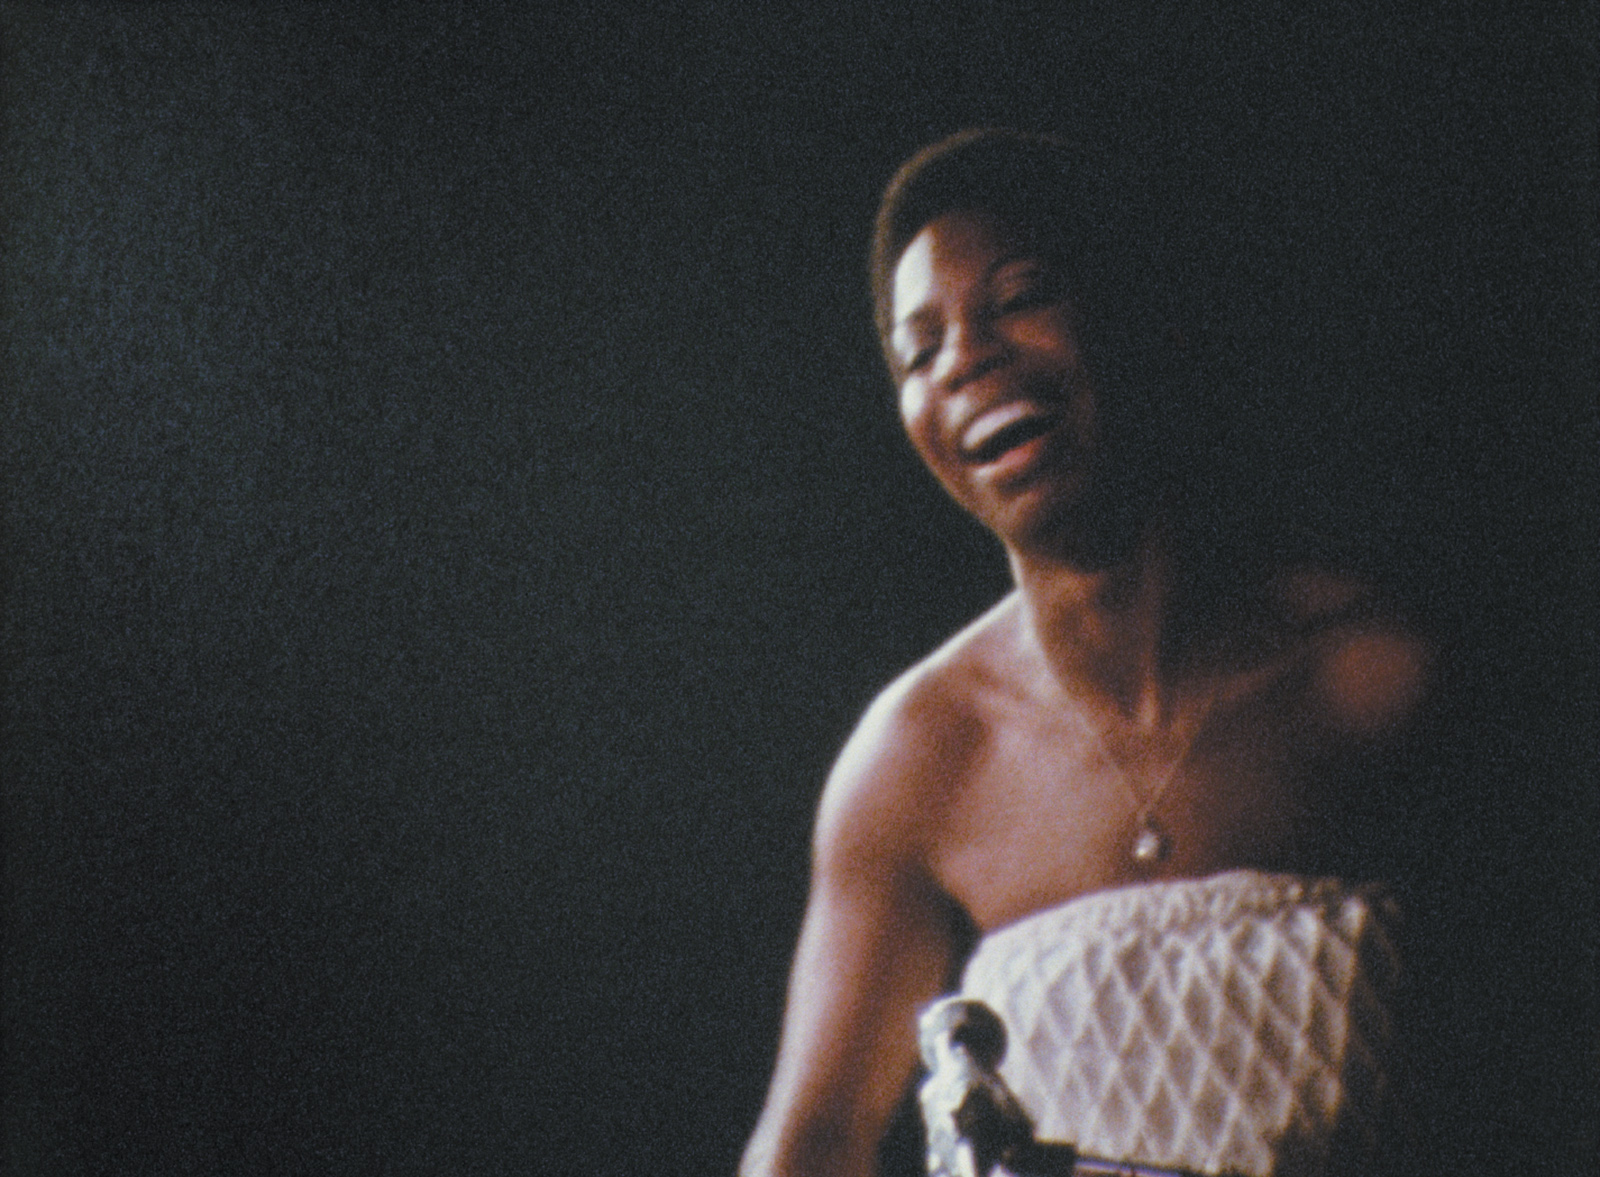 Nina Simone performing at the Village Gate, late 1960s